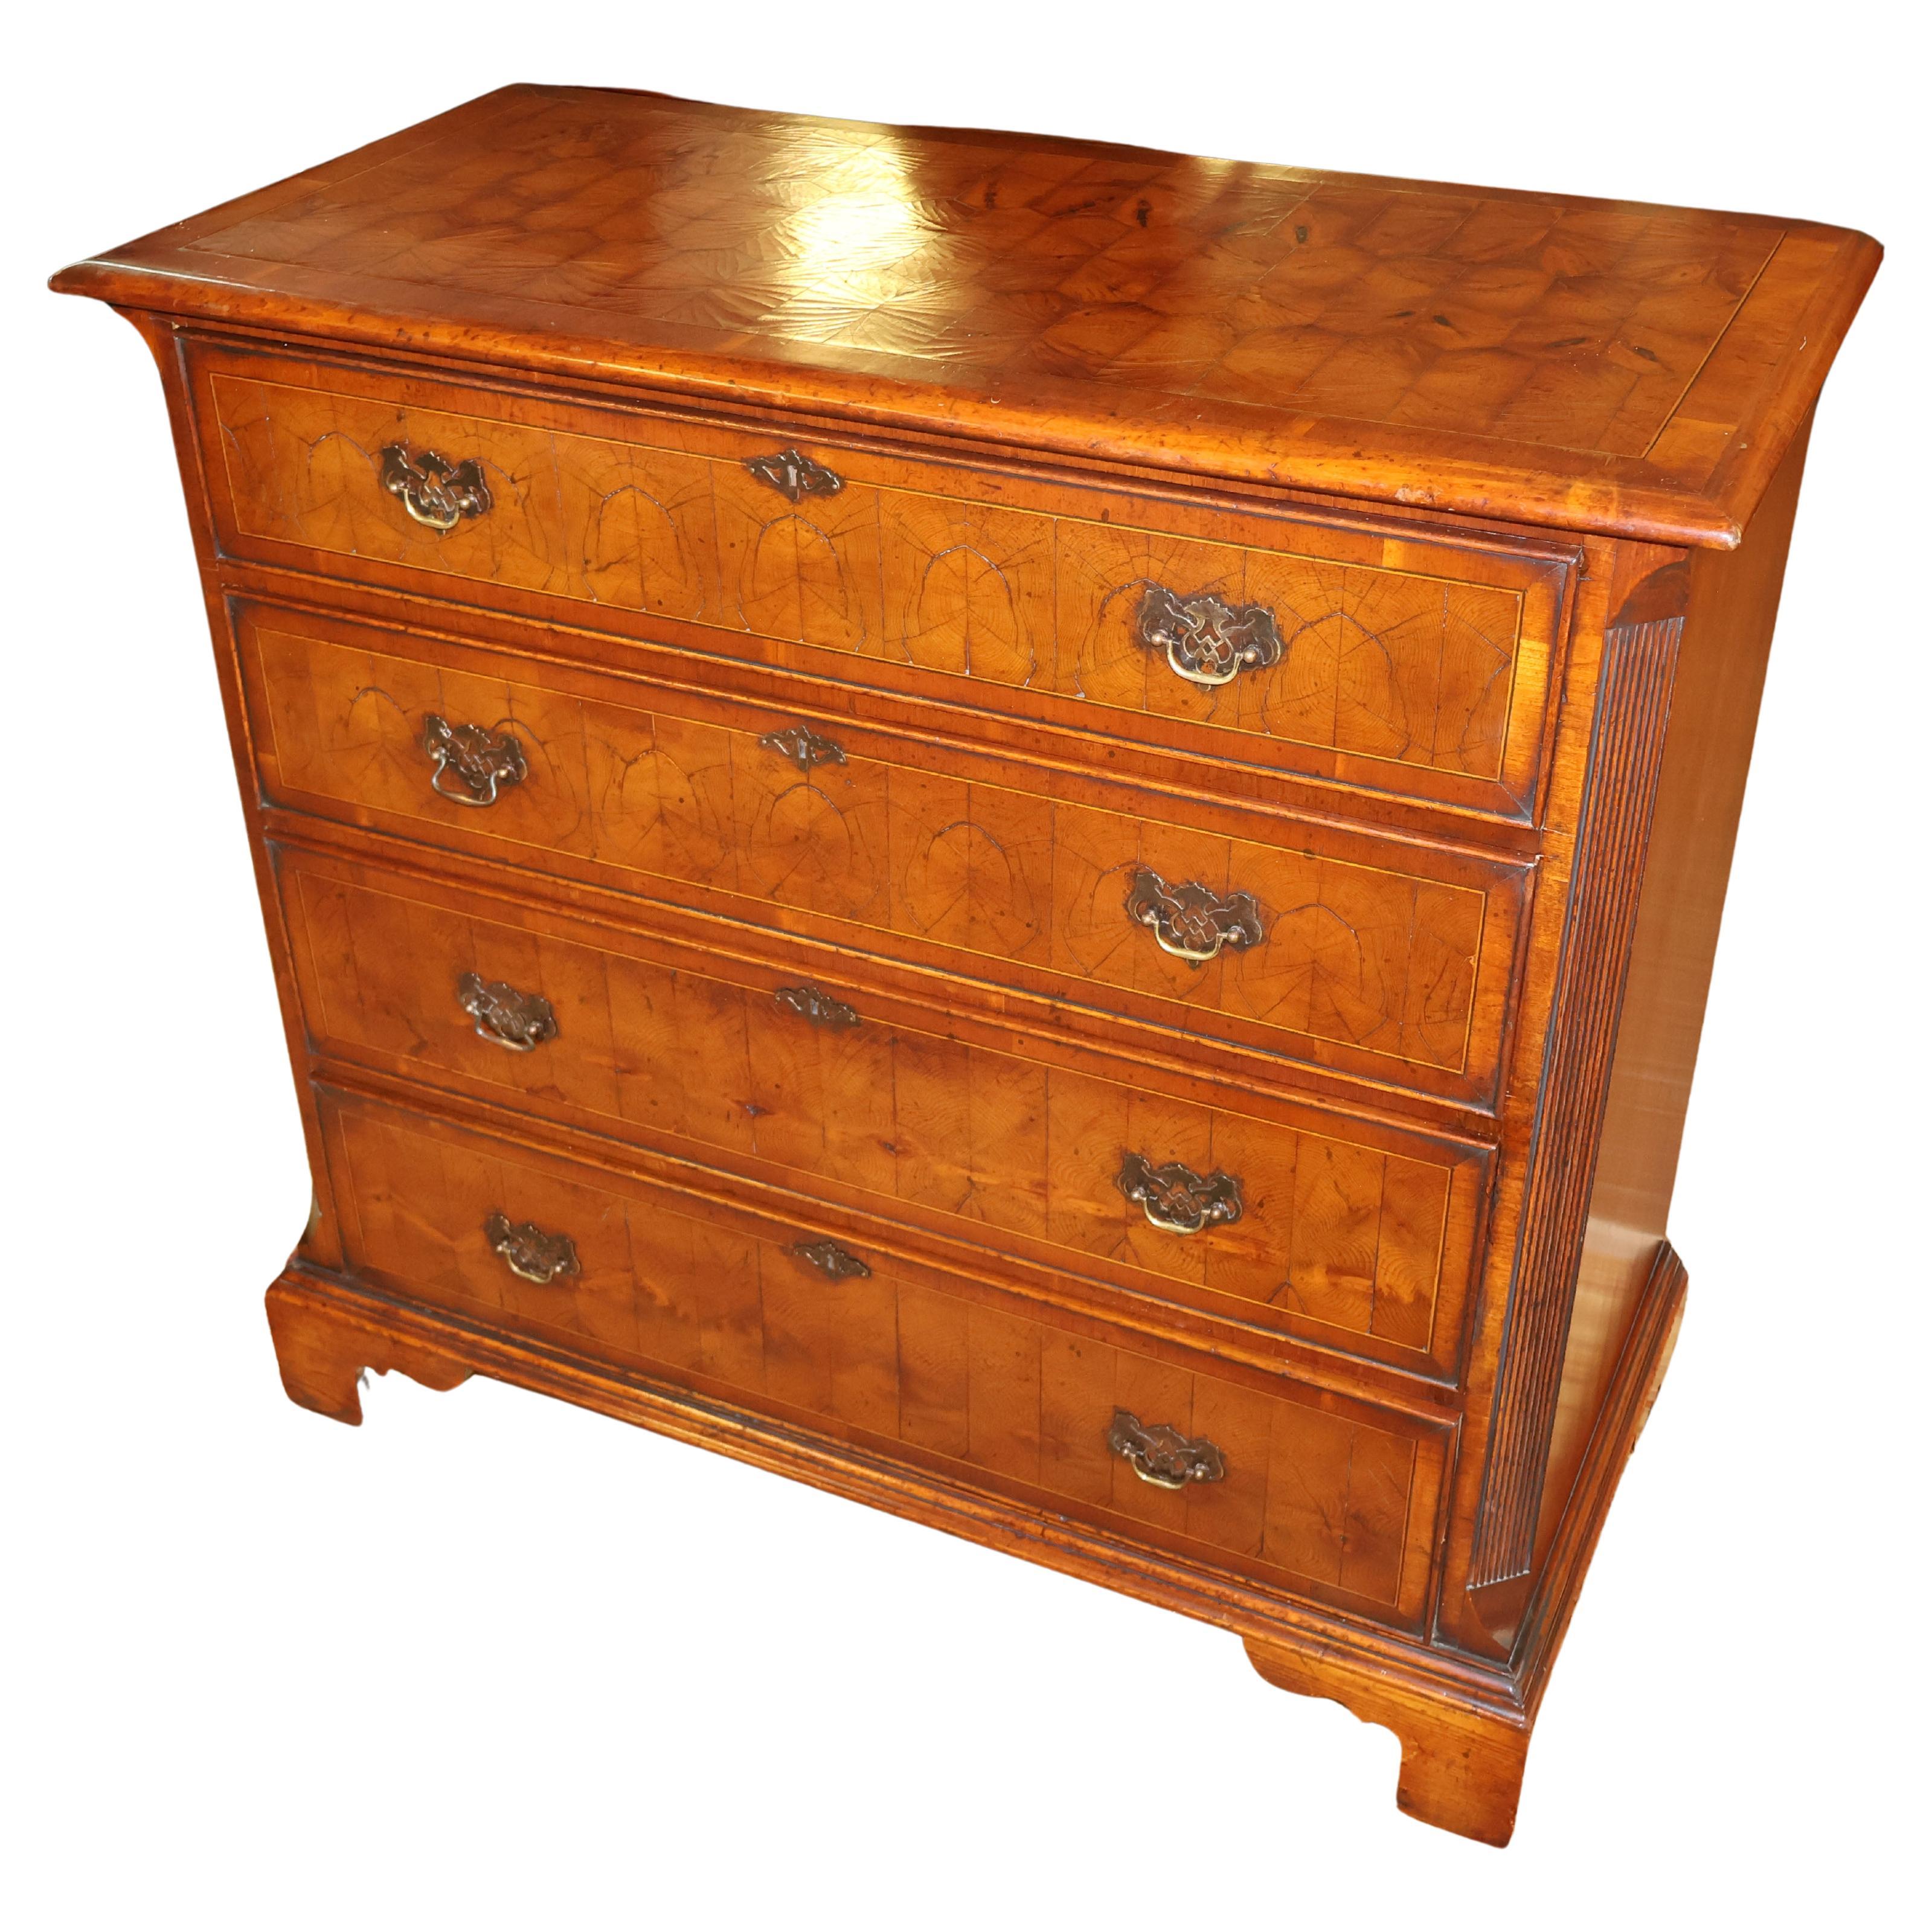 English George II Style Burled Oysterwood Dresser Chest of Drawers